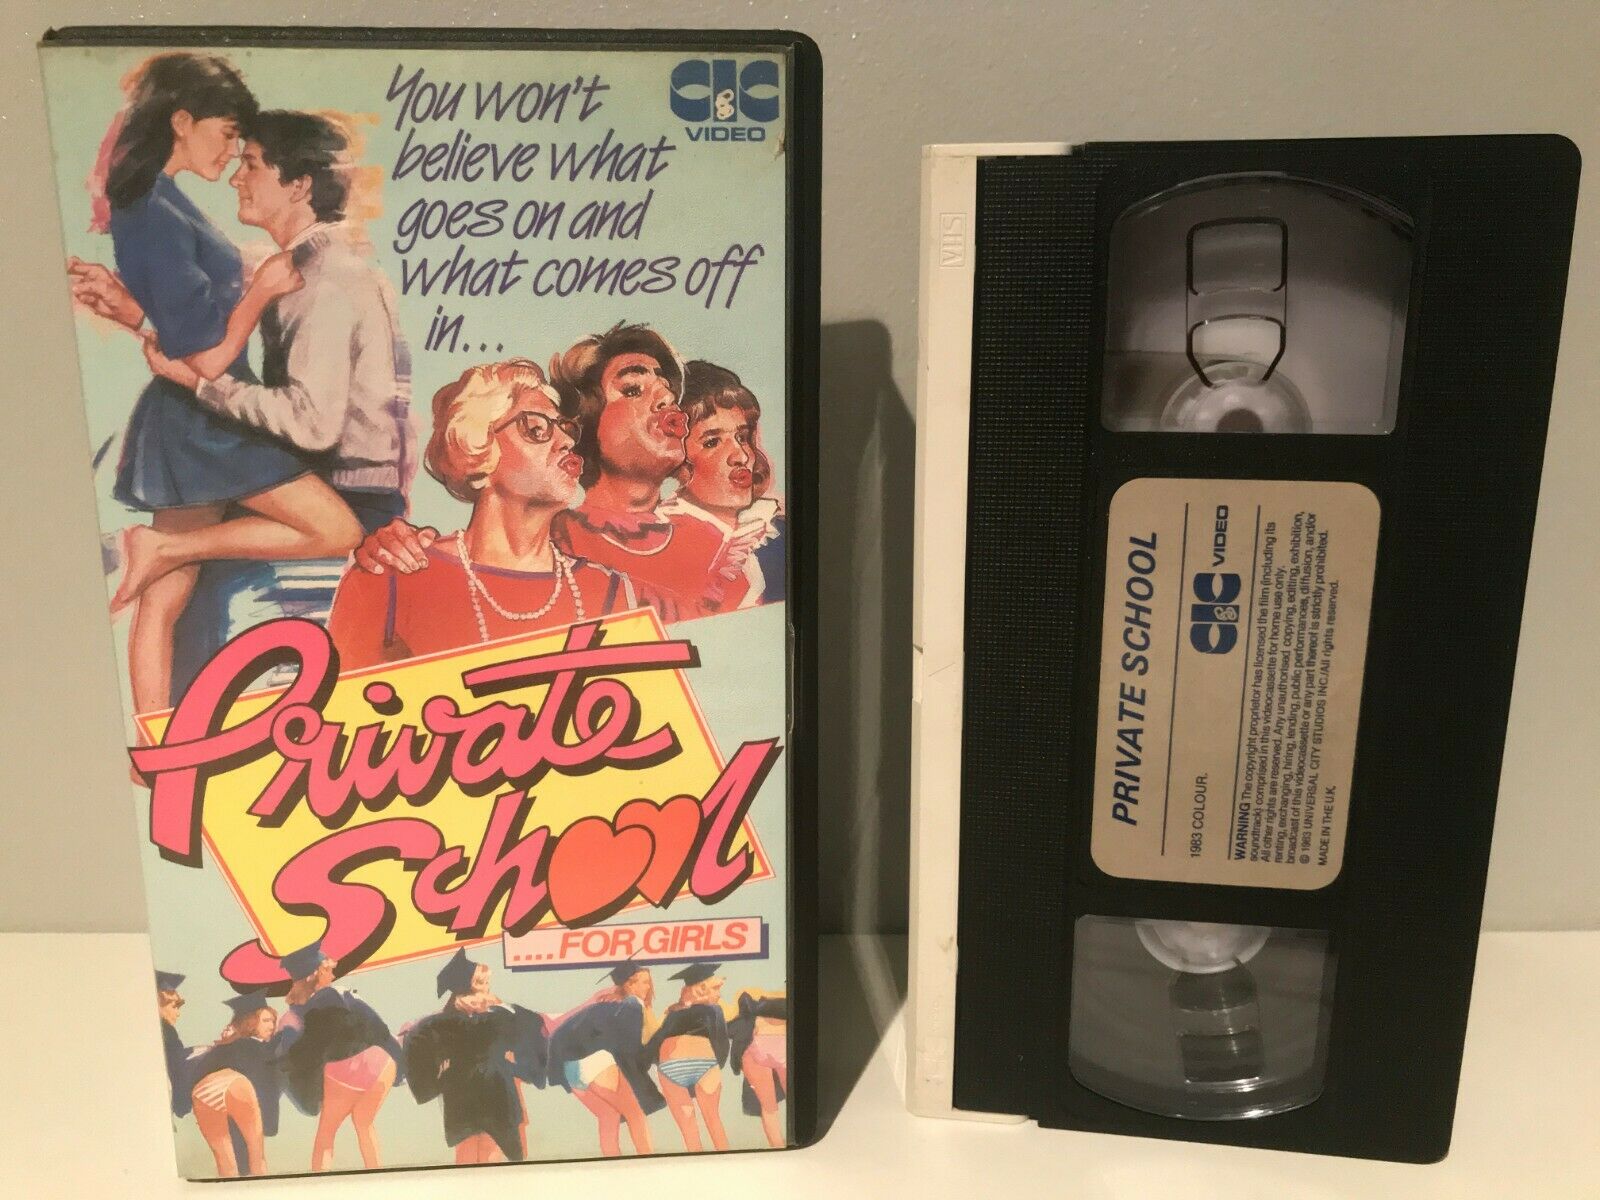 Private School For Girls (1972): German Erotic Comedy - Sexploitation - Pal VHS-